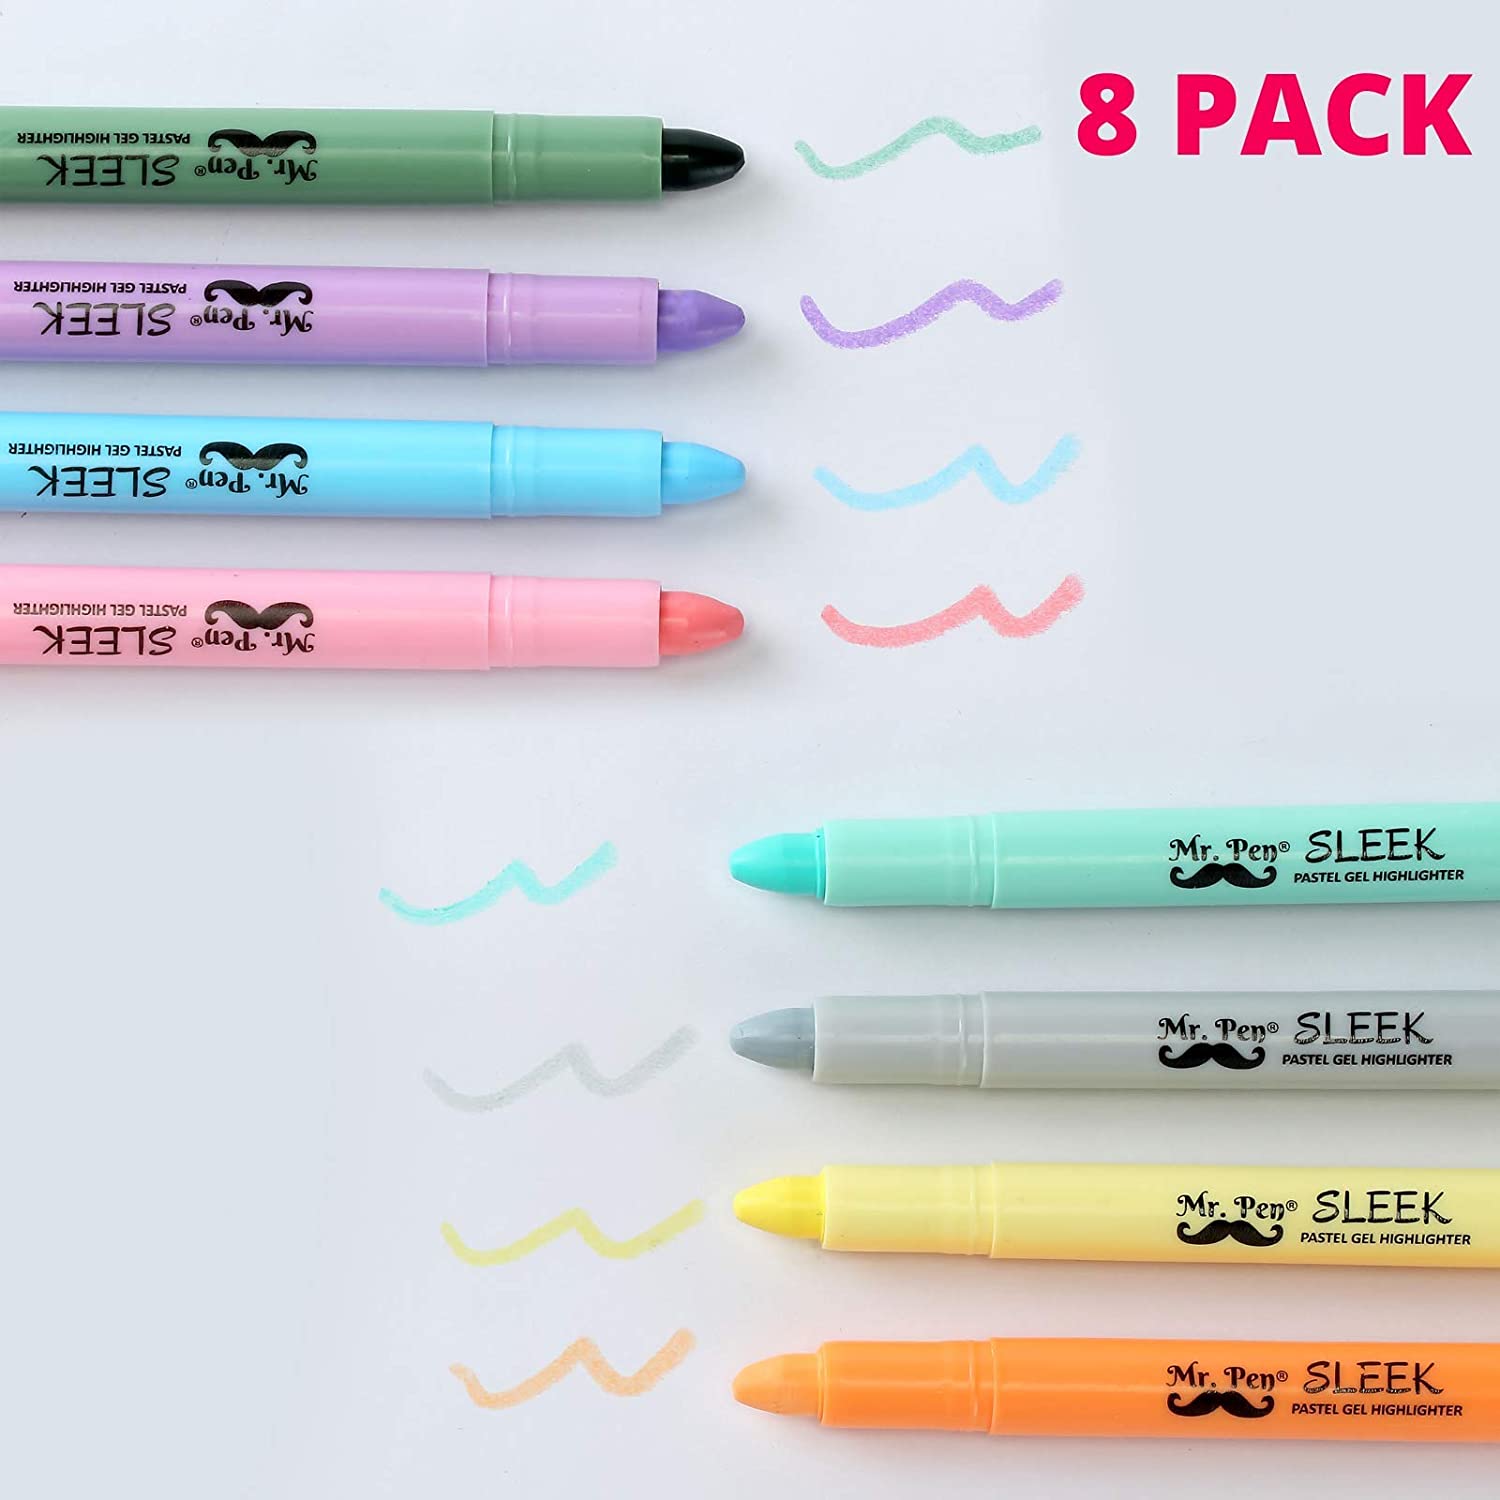 Mr. Pen- Bible Gel Highlighters and Fineliner Pens No Bleed, Pastel Colors, 10 Pack, Bible Journaling Kit, Bible Highlighters and Pens No Bleed, Bible